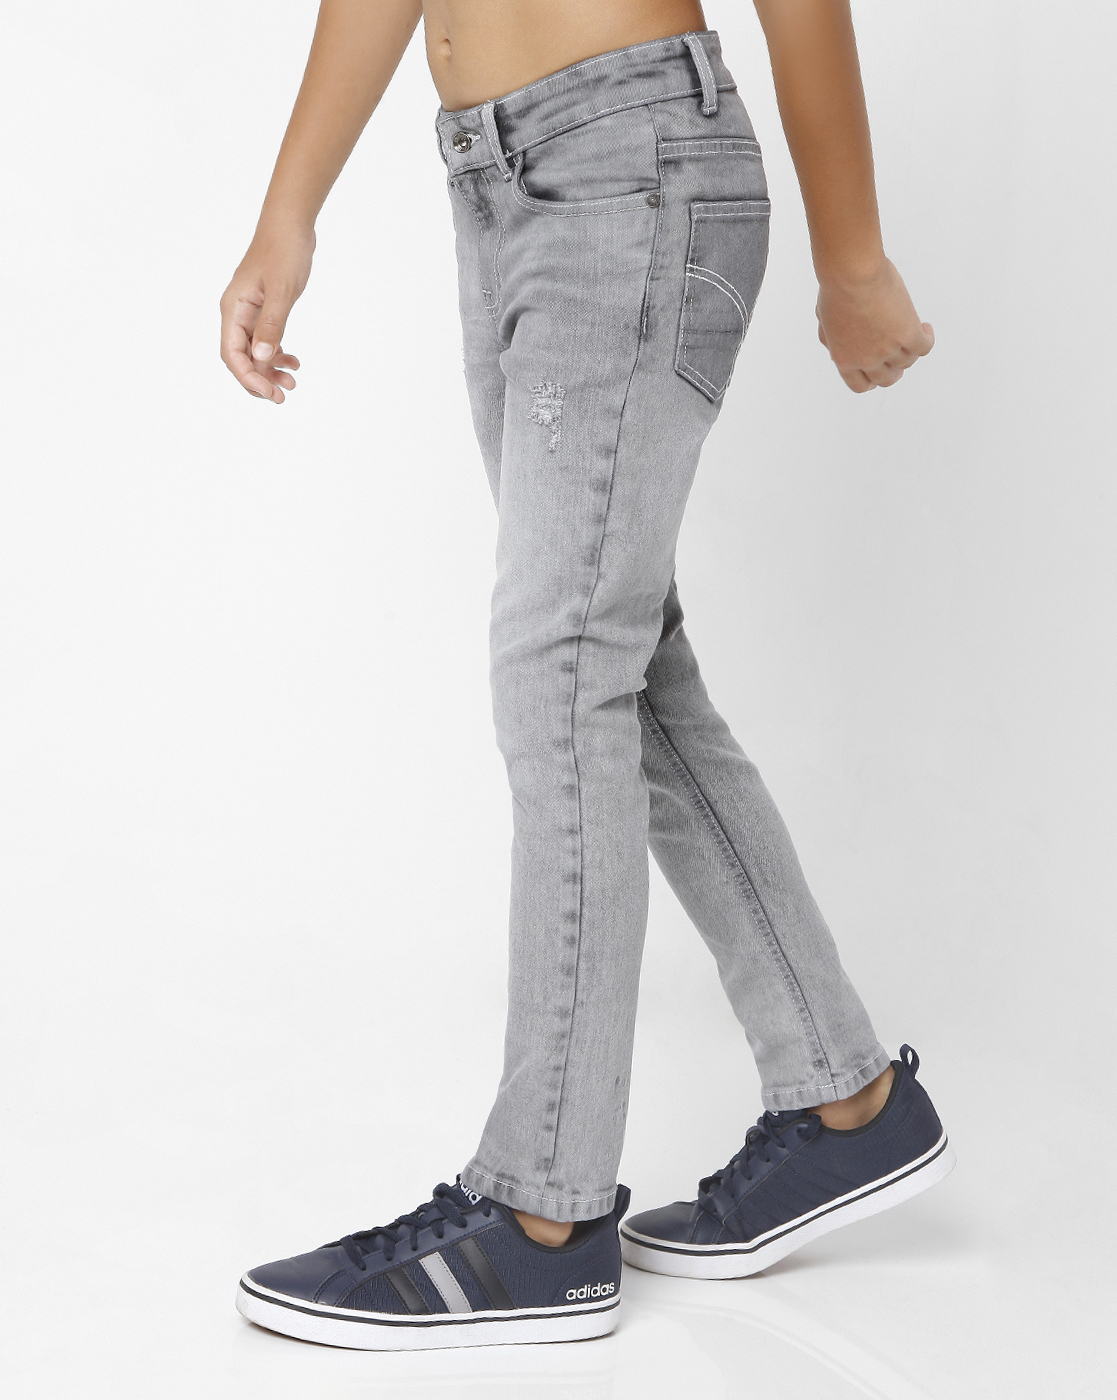 GAS KIDS Boys Solid Grey Jeans